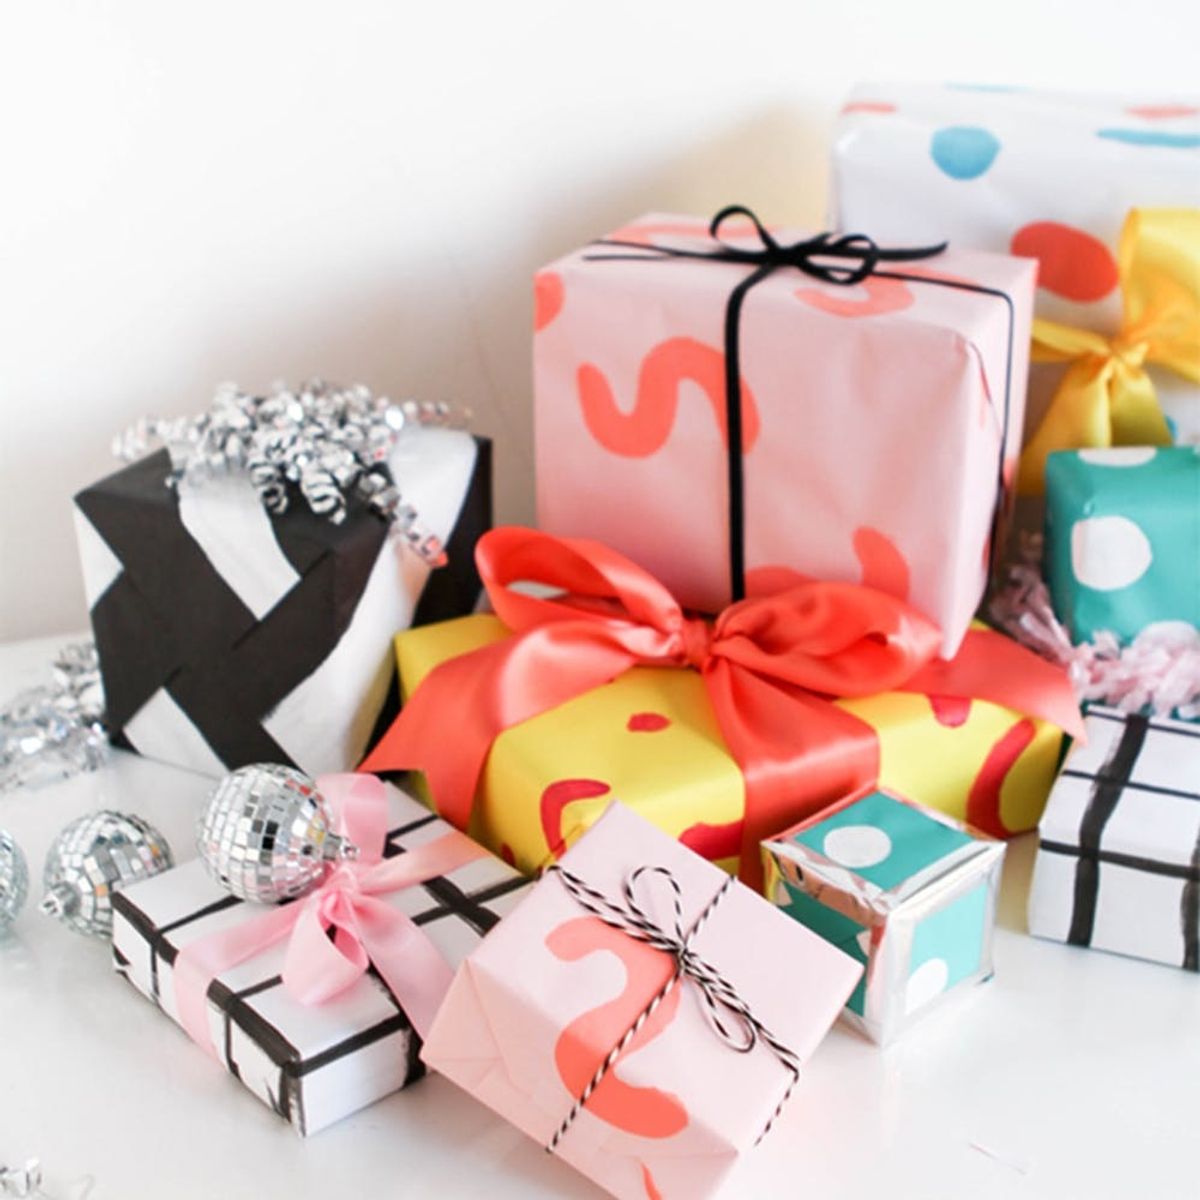 How to Make the Prettiest Presents EVER This Holiday